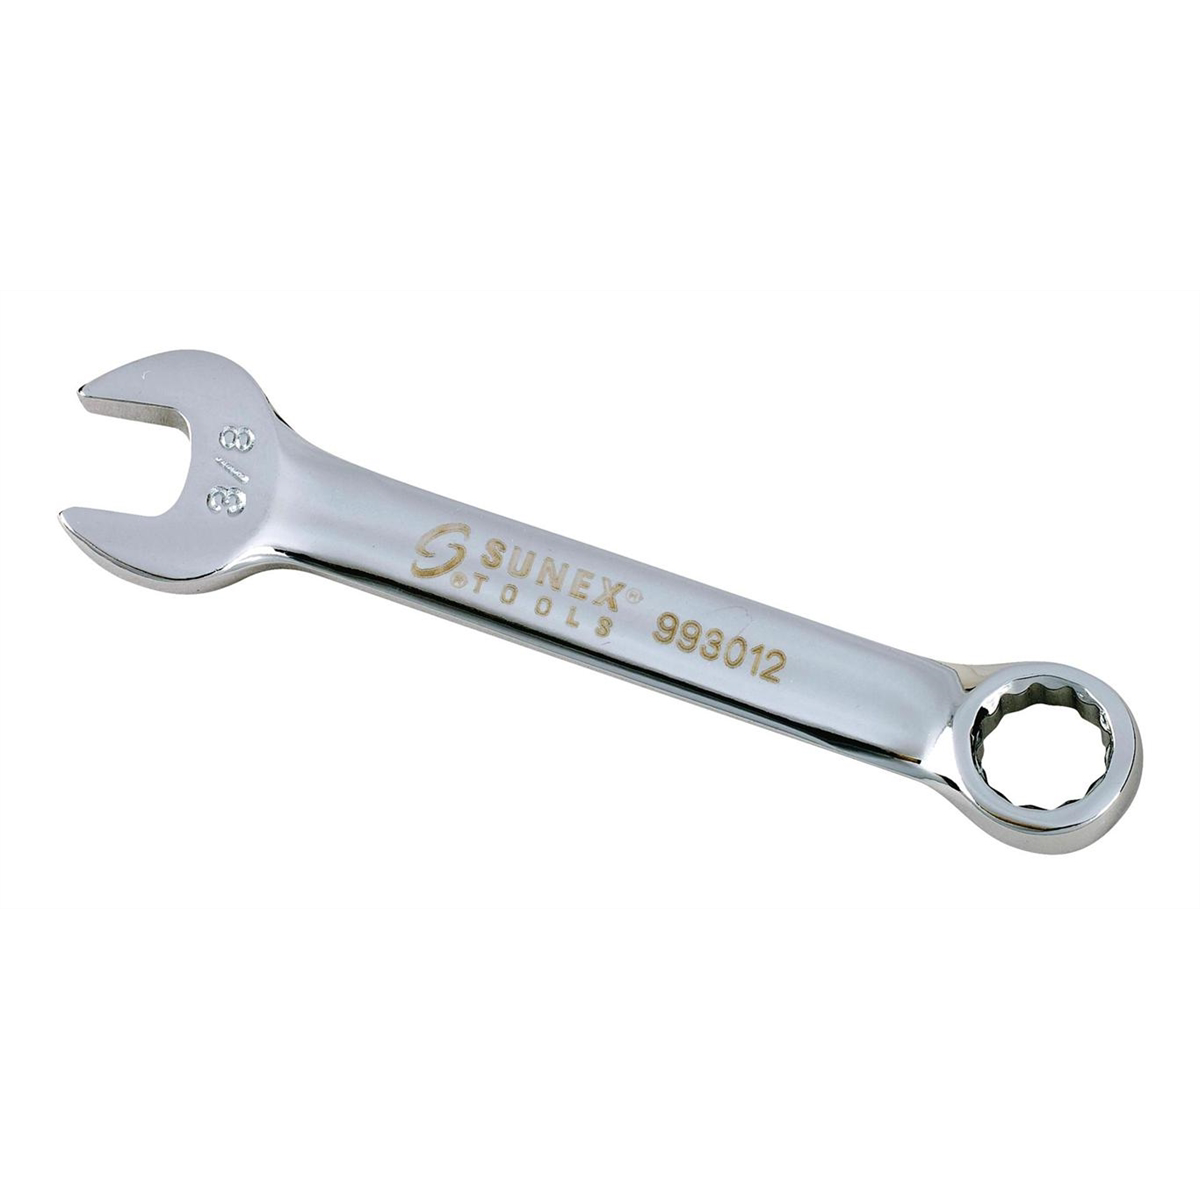 Stubby Combination Wrench 3/8 Inch